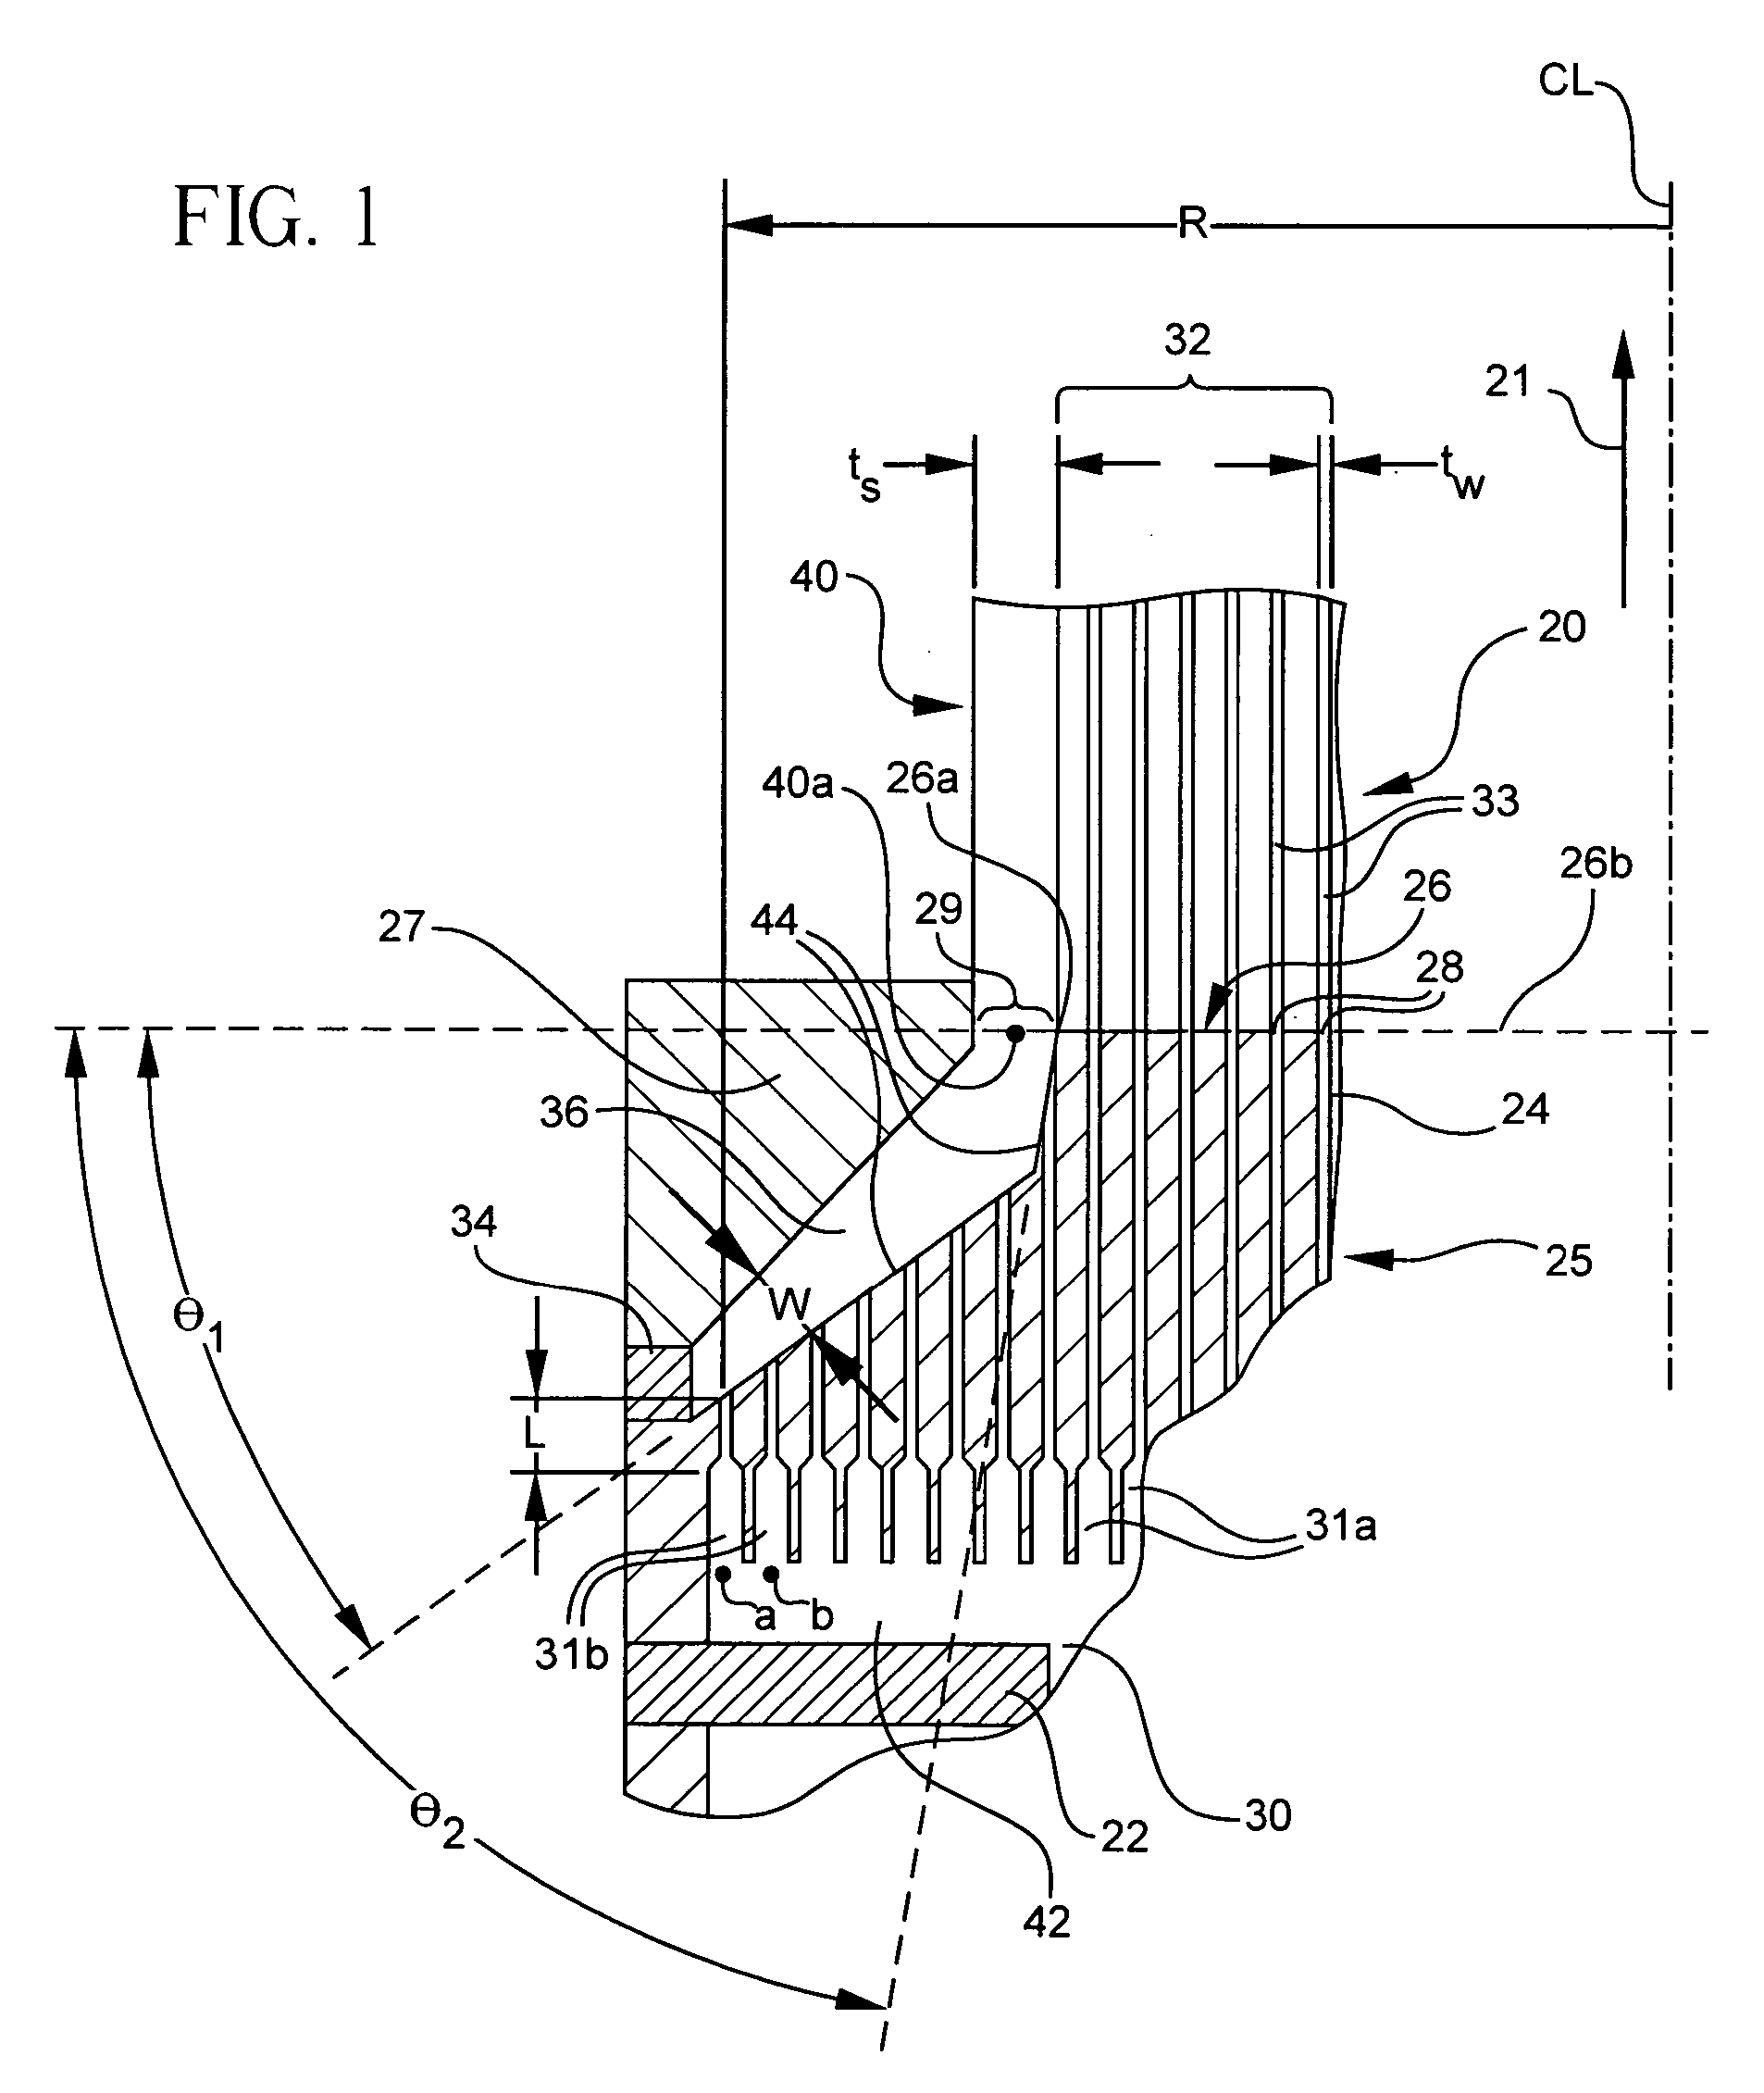 Methods for extruding a honeycomb article with a skin surrounding a central cellular structure